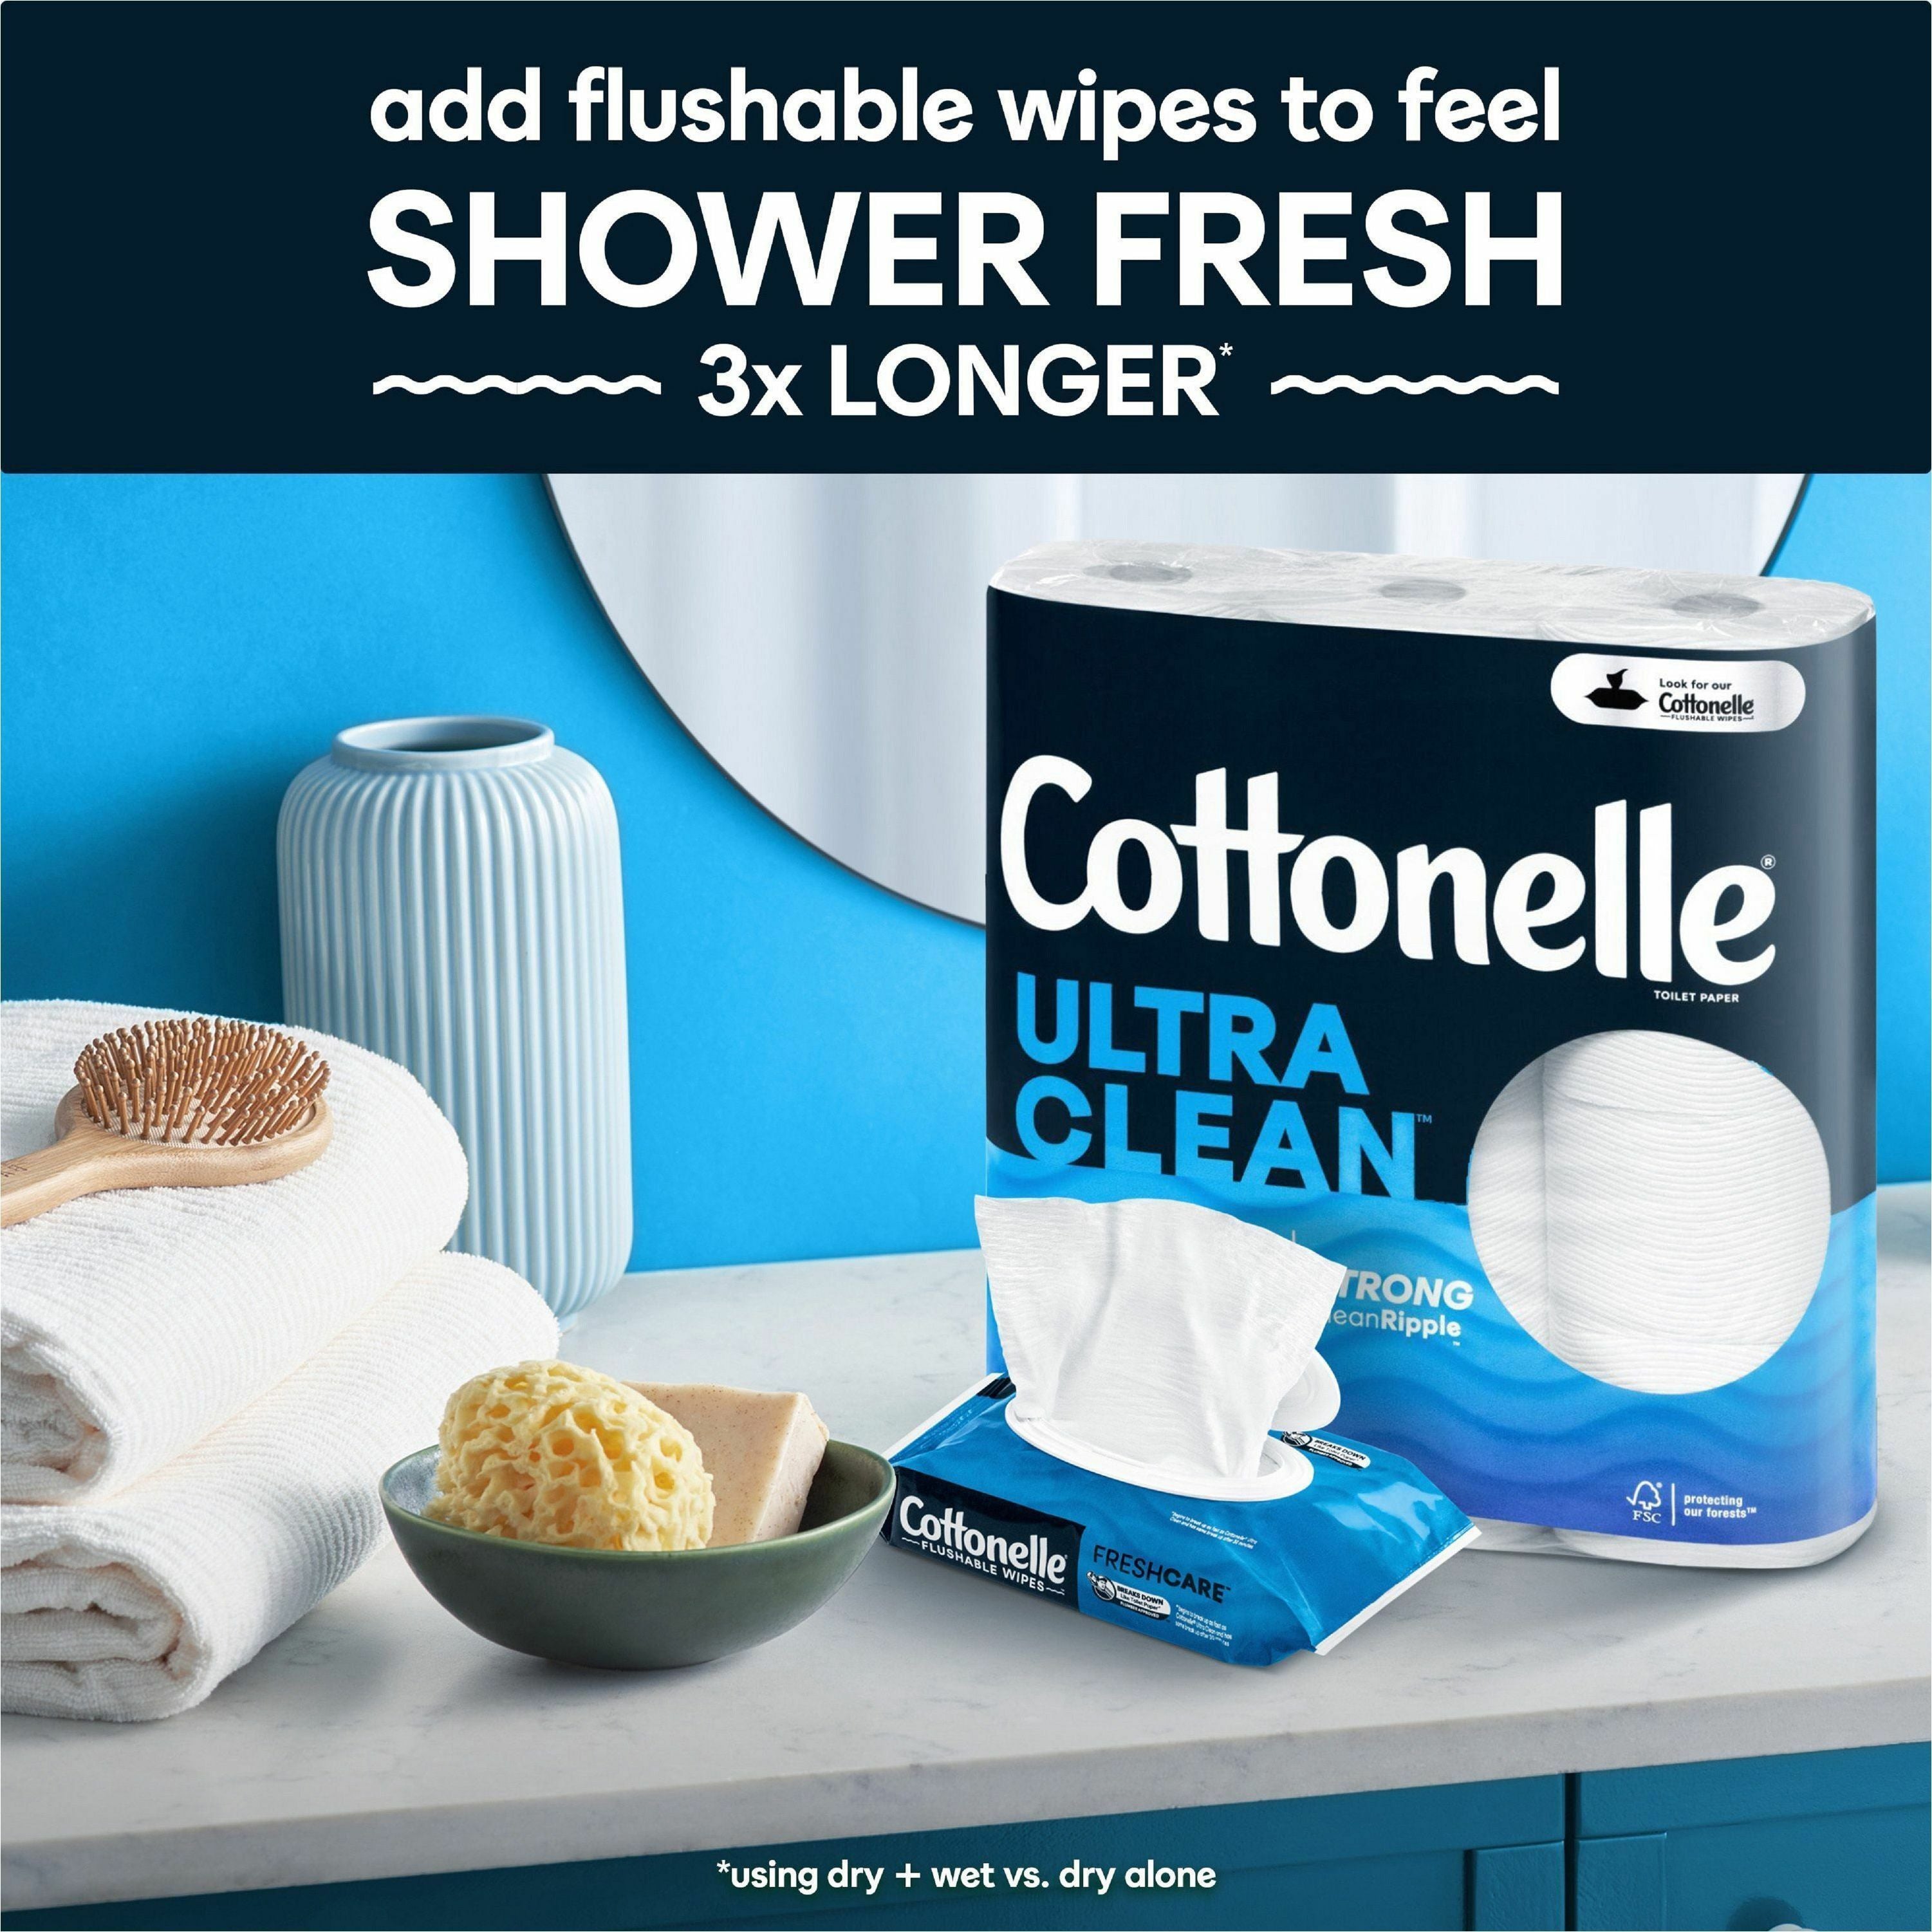 cottonelle-ultra-clean-toilet-paper-1-ply-312-sheets-roll-white-fiber-flushable-clog-safe-sewer-safe-septic-safe-chemical-free-dye-free-thick-absorbent-fragrance-free-paraben-free-for-toilet-2-carton_kcc54161ct - 3